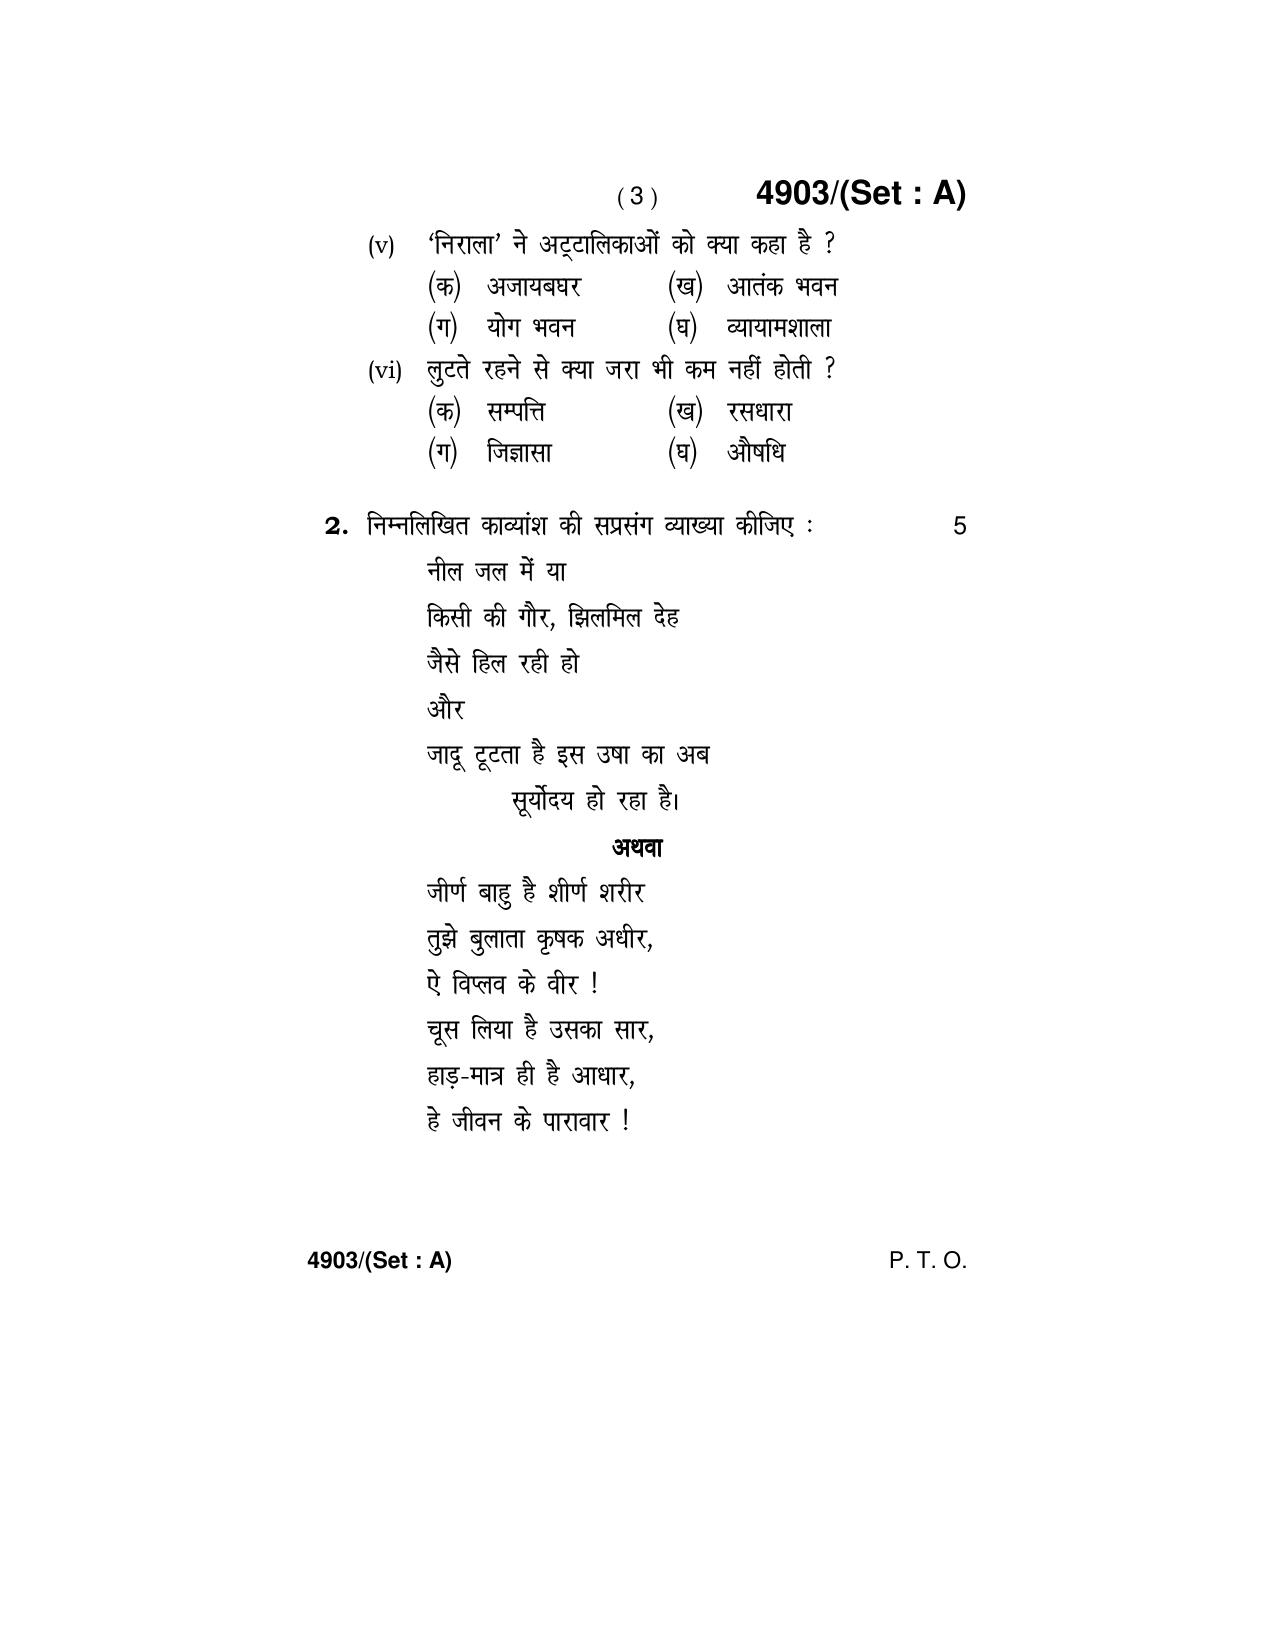 Haryana Board HBSE Class 12 Hindi Core 2020 Question Paper - Page 3